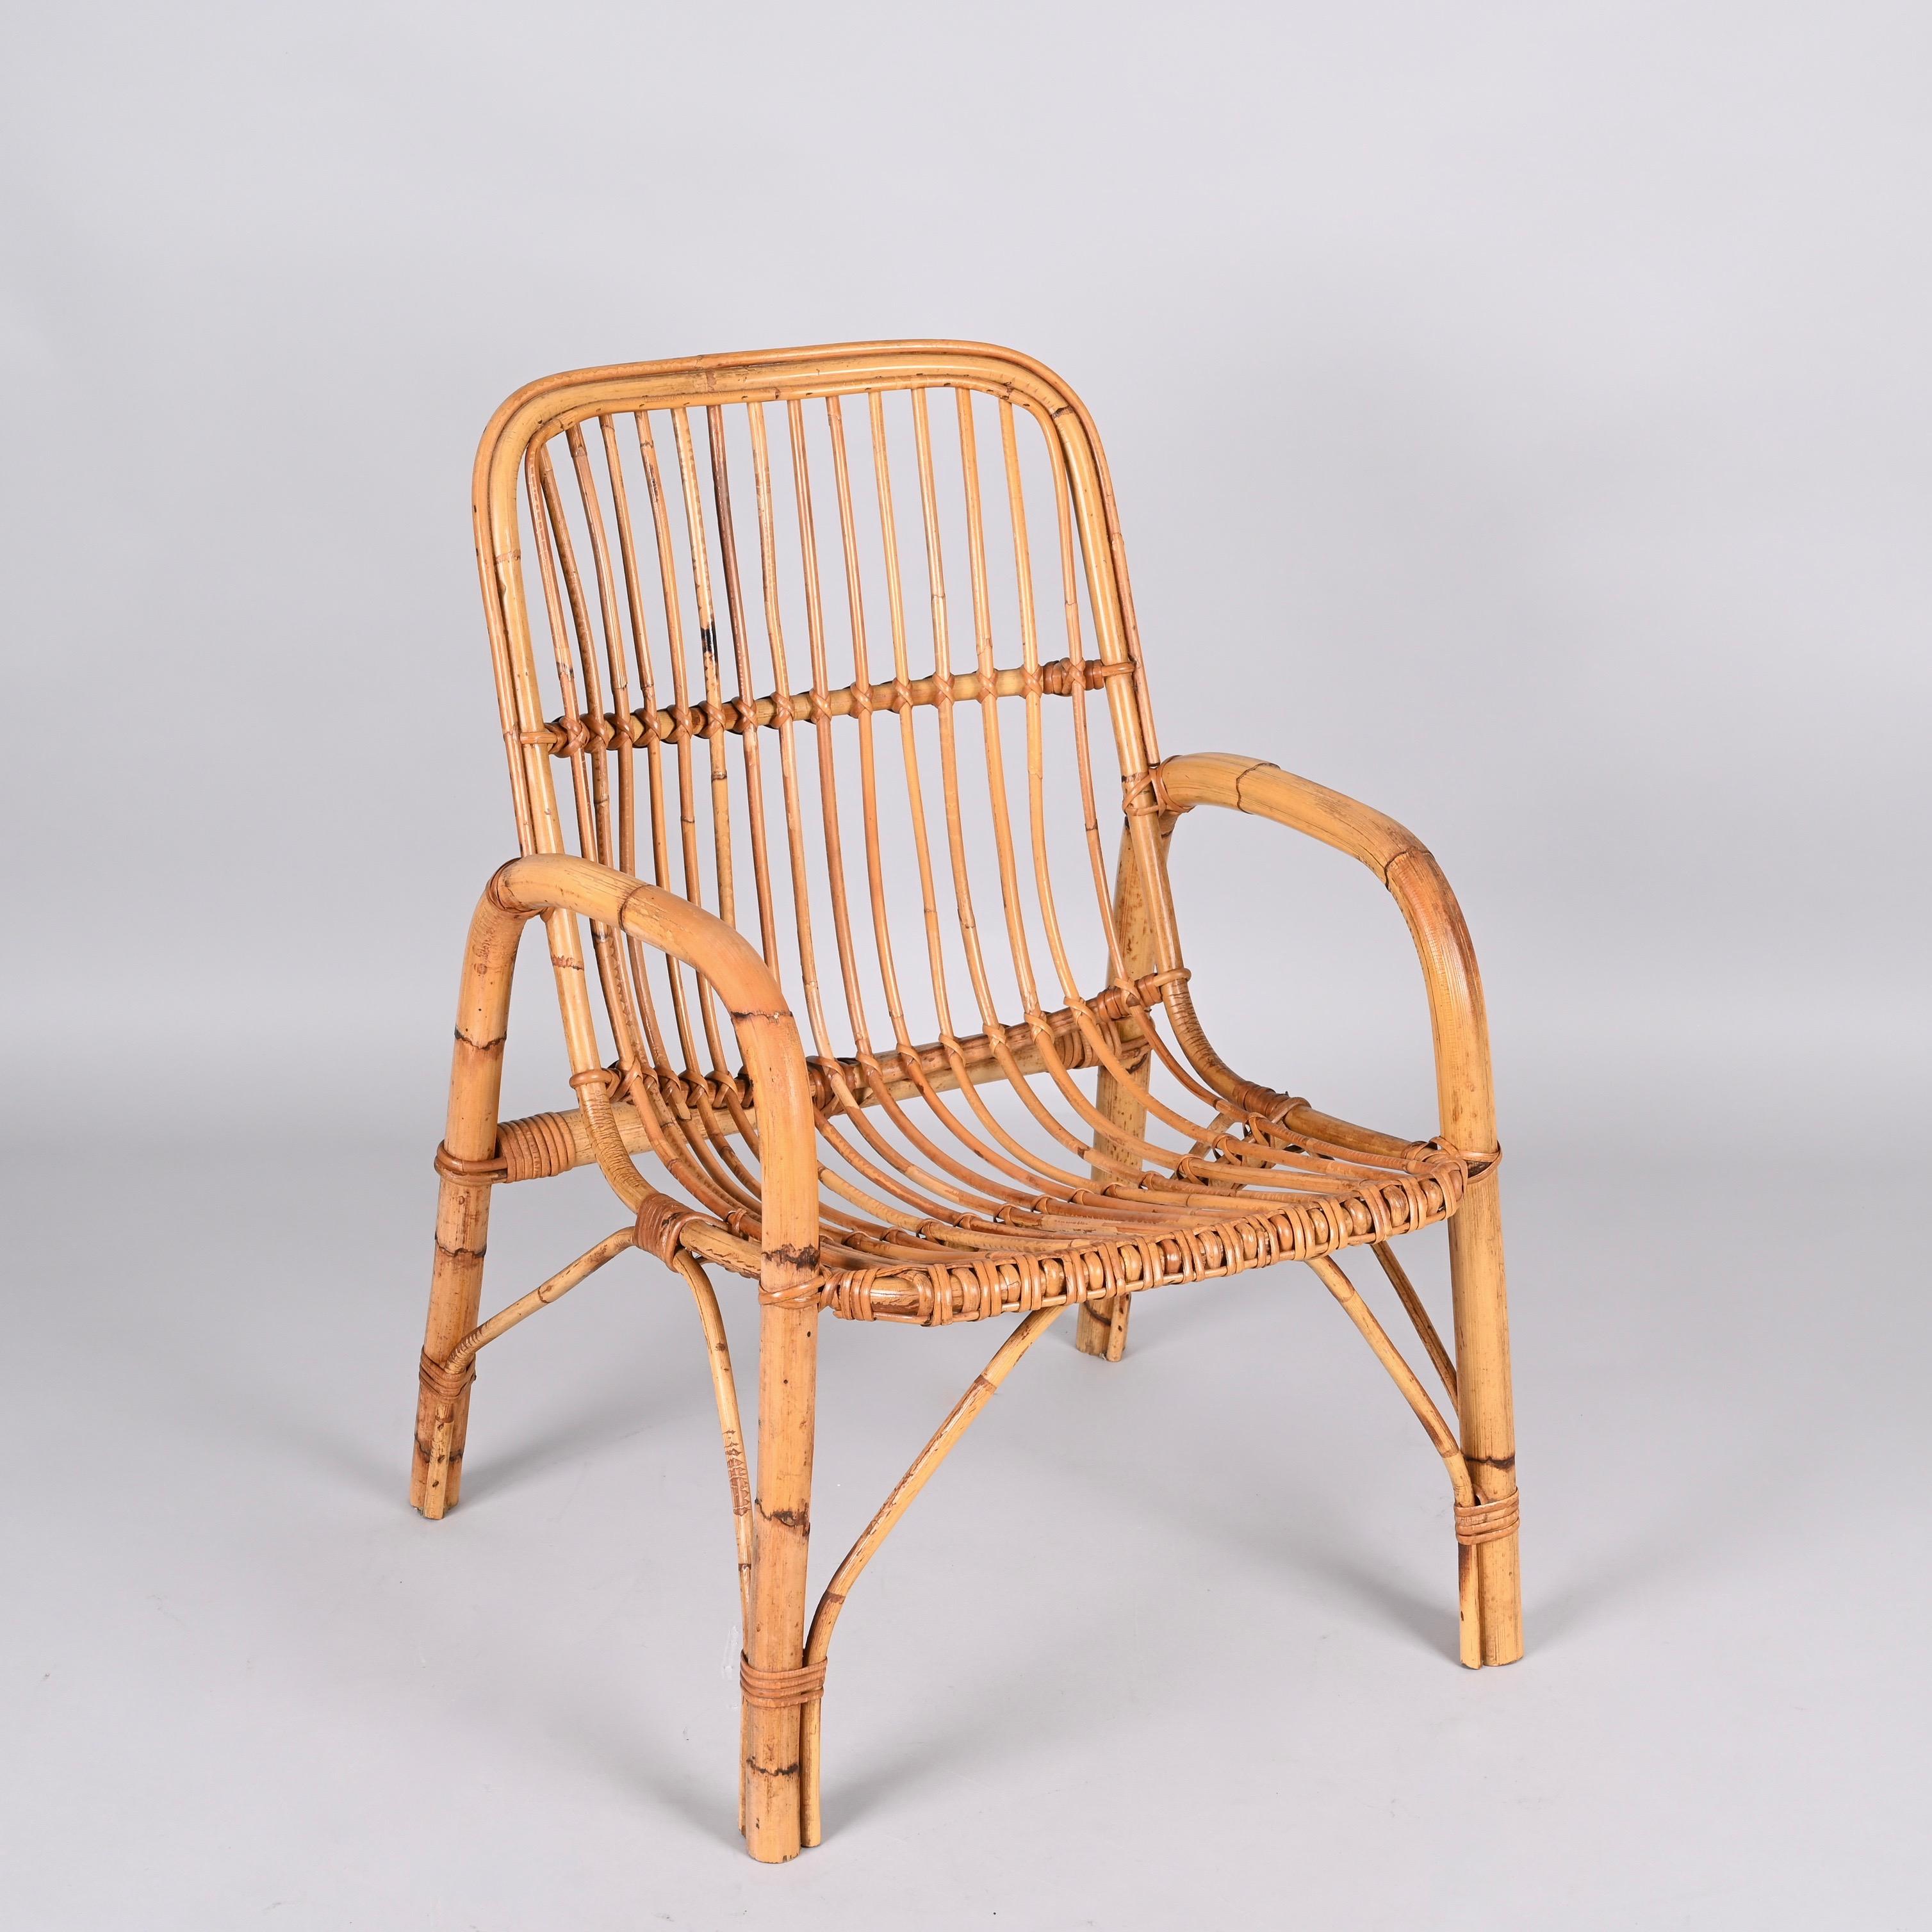 Midcentury rattan and bamboo Italian armchair. This item was produced in Italy during 1960s.

The seat is made of thin rattan elements while the structural elements are made of bamboo with a rectangular bamboo element on each side, giving a 1960s